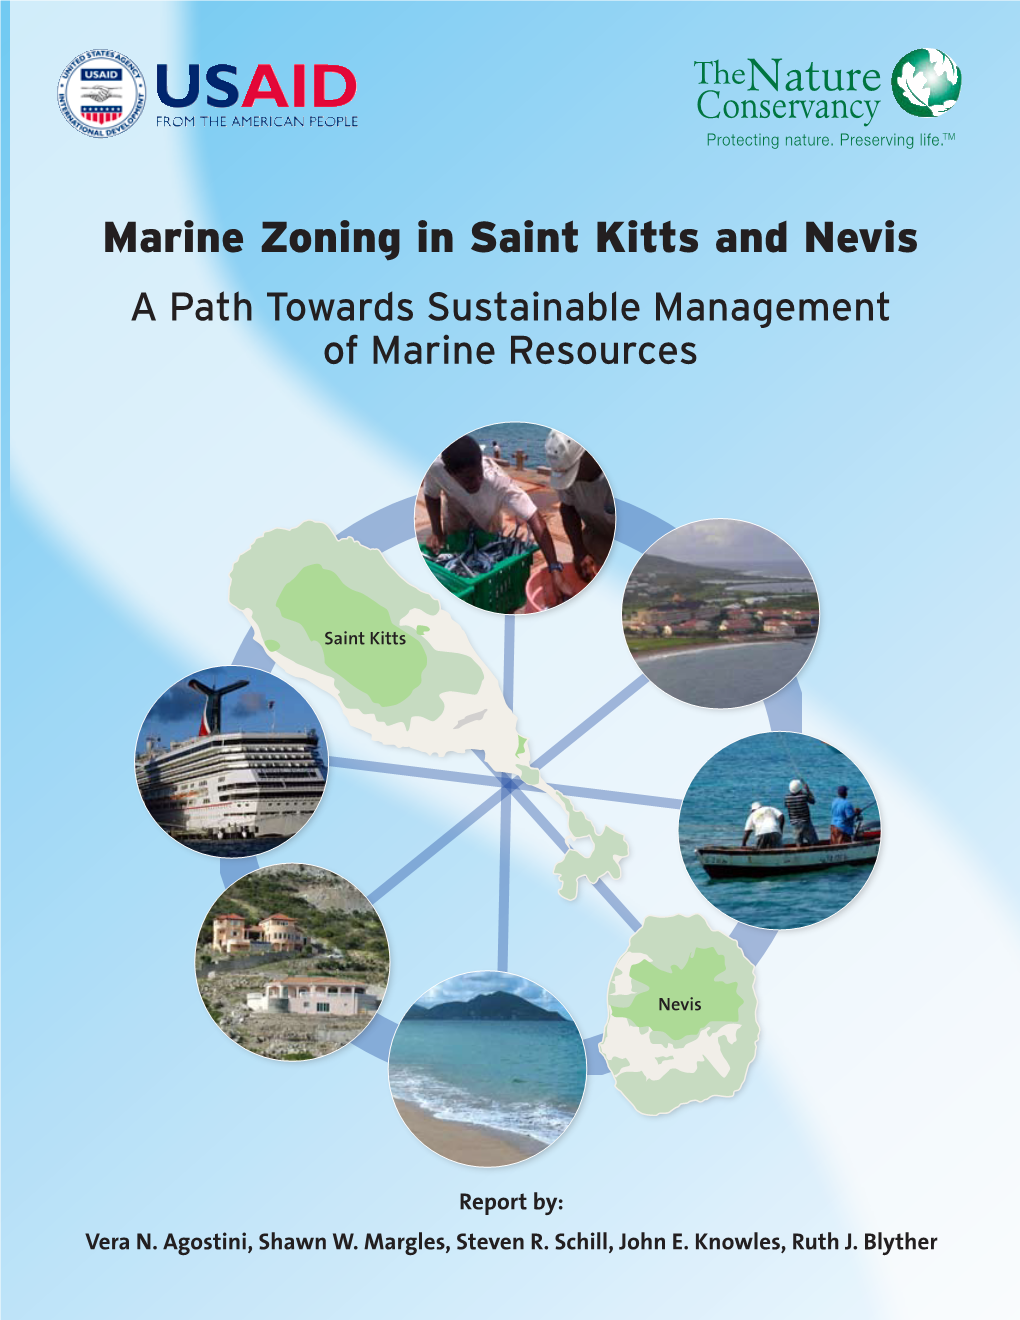 Marine Zoning in Saint Kitts and Nevis a Path Towards Sustainable Management of Marine Resources